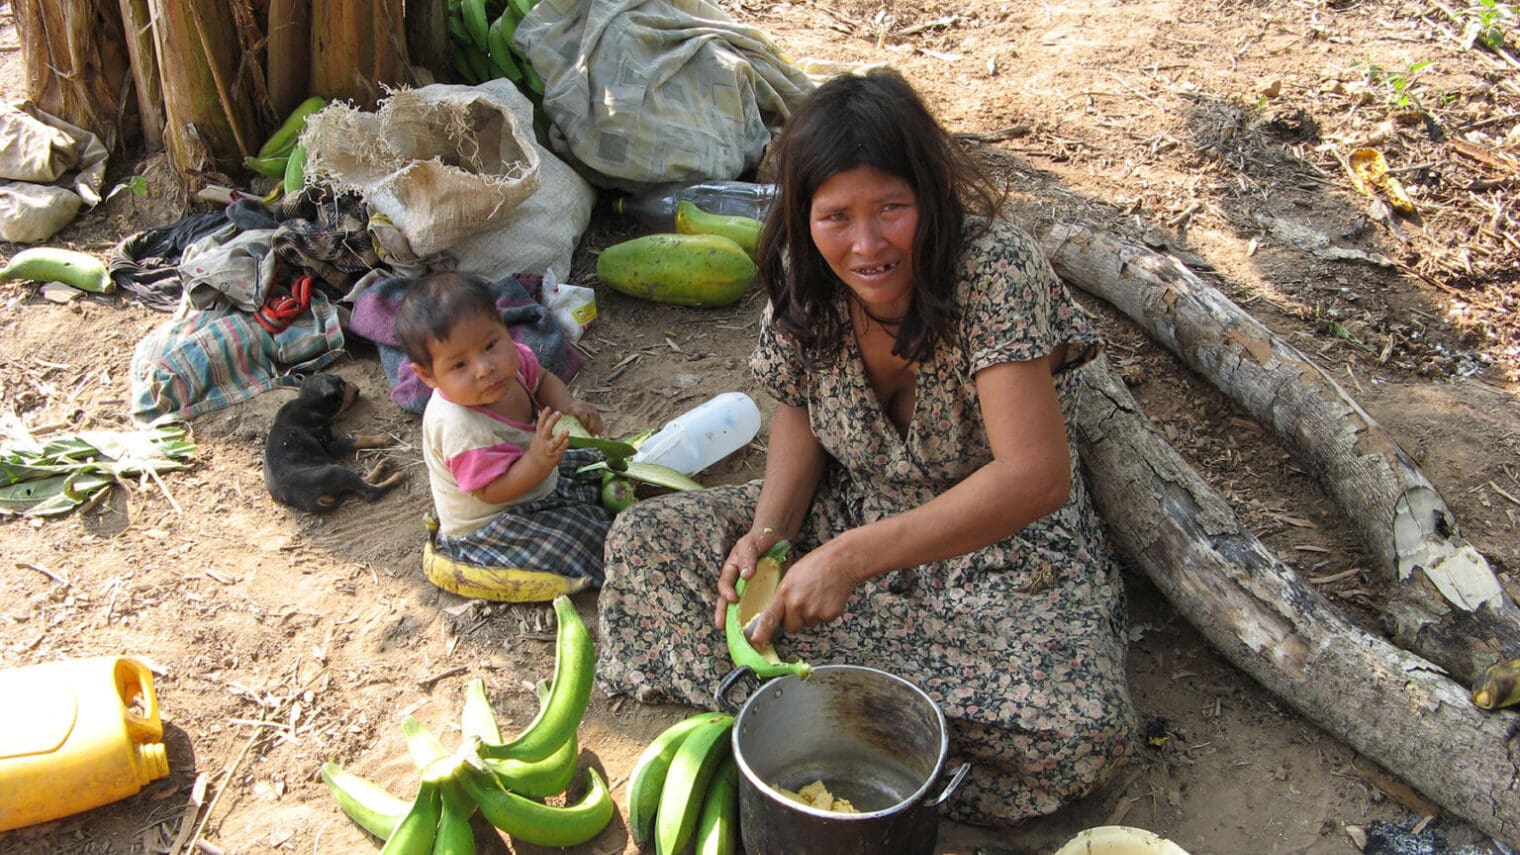 Tsimane woman scooping out banana with a baby next to her